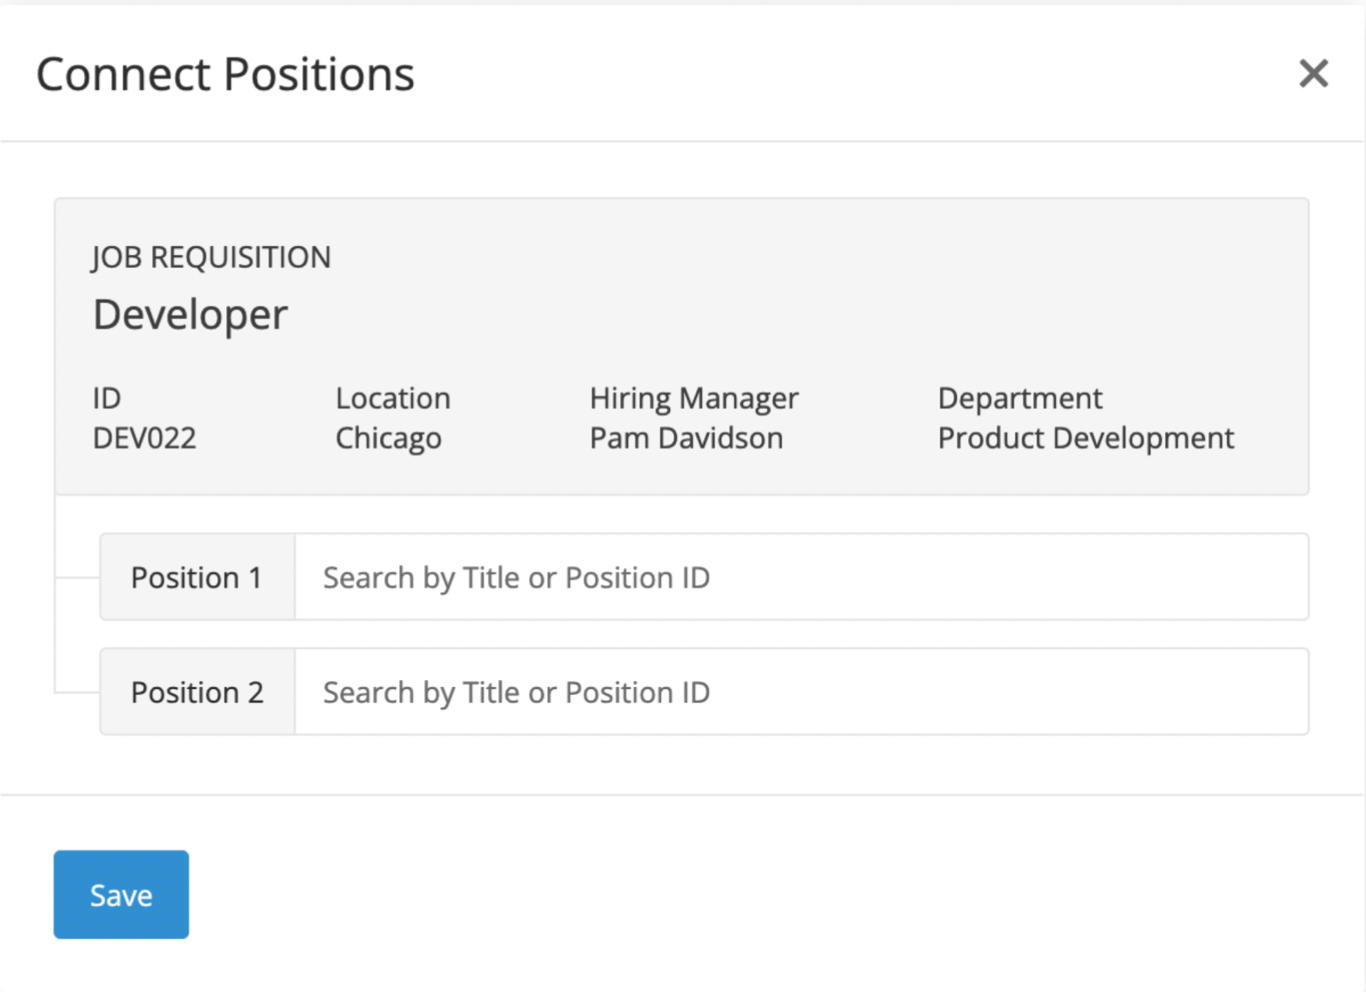 Lever connect positions modal with job requisition and two job position fields